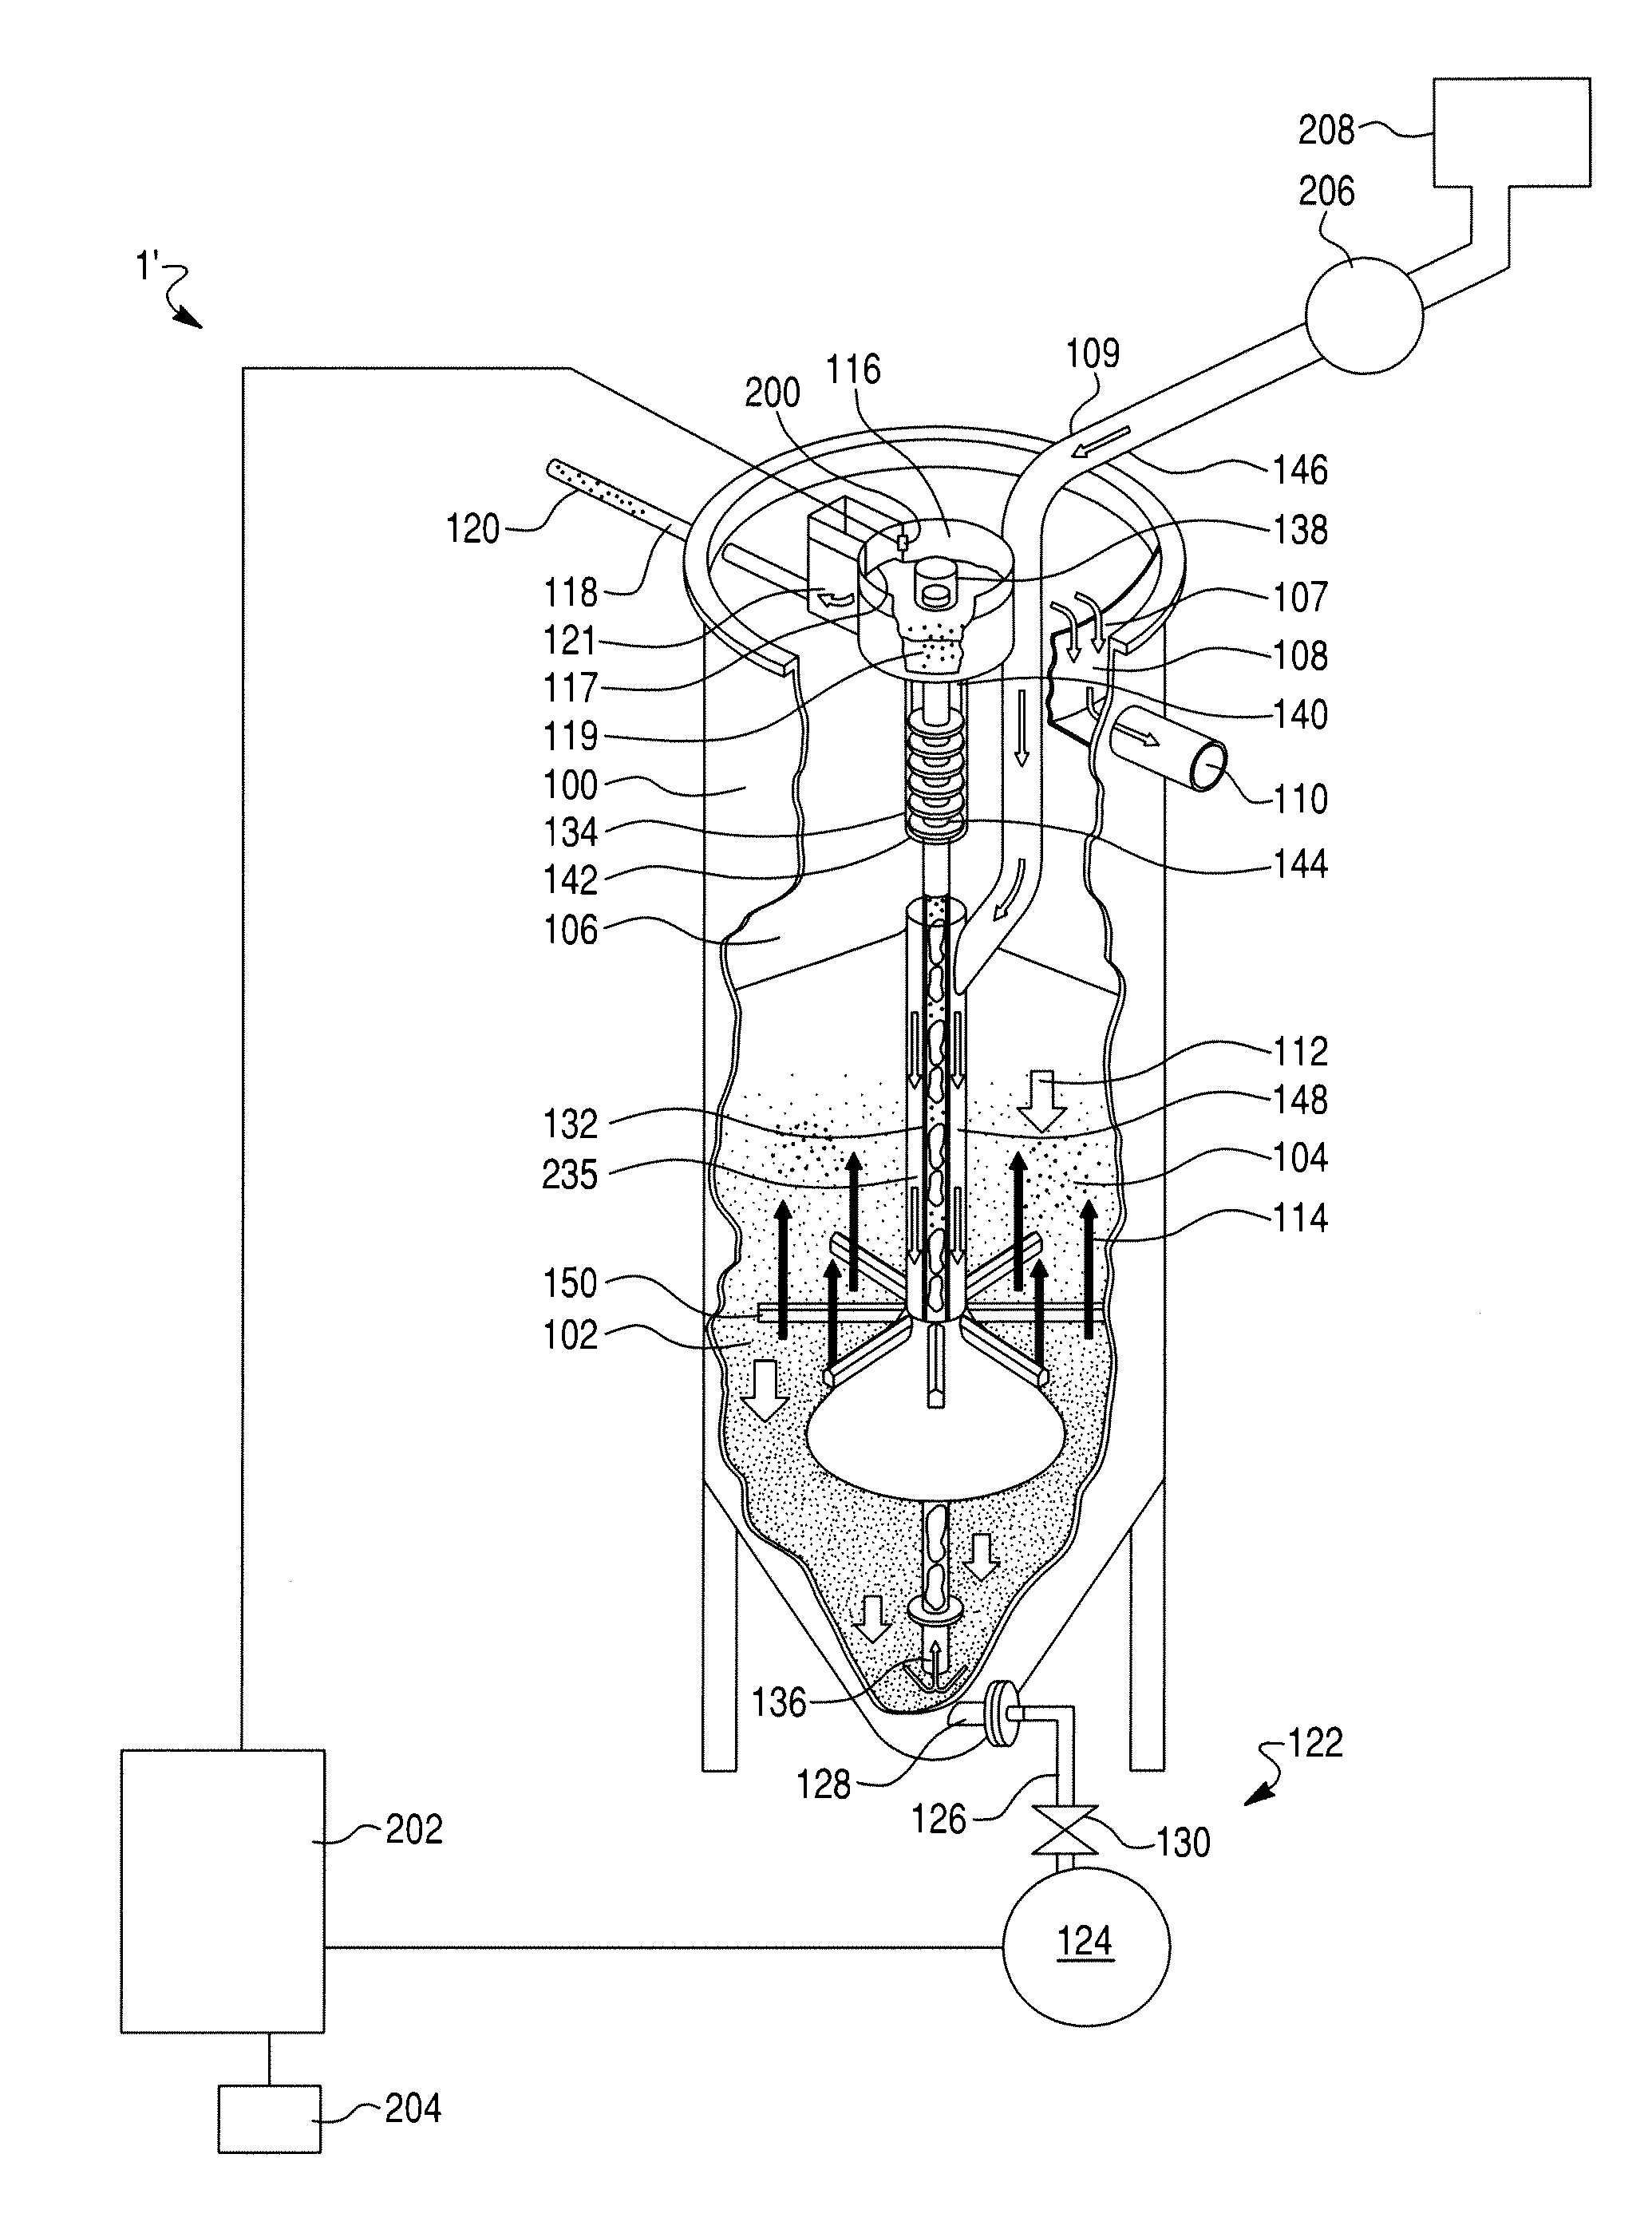 Method and computer program product for treating liquid containing impurities